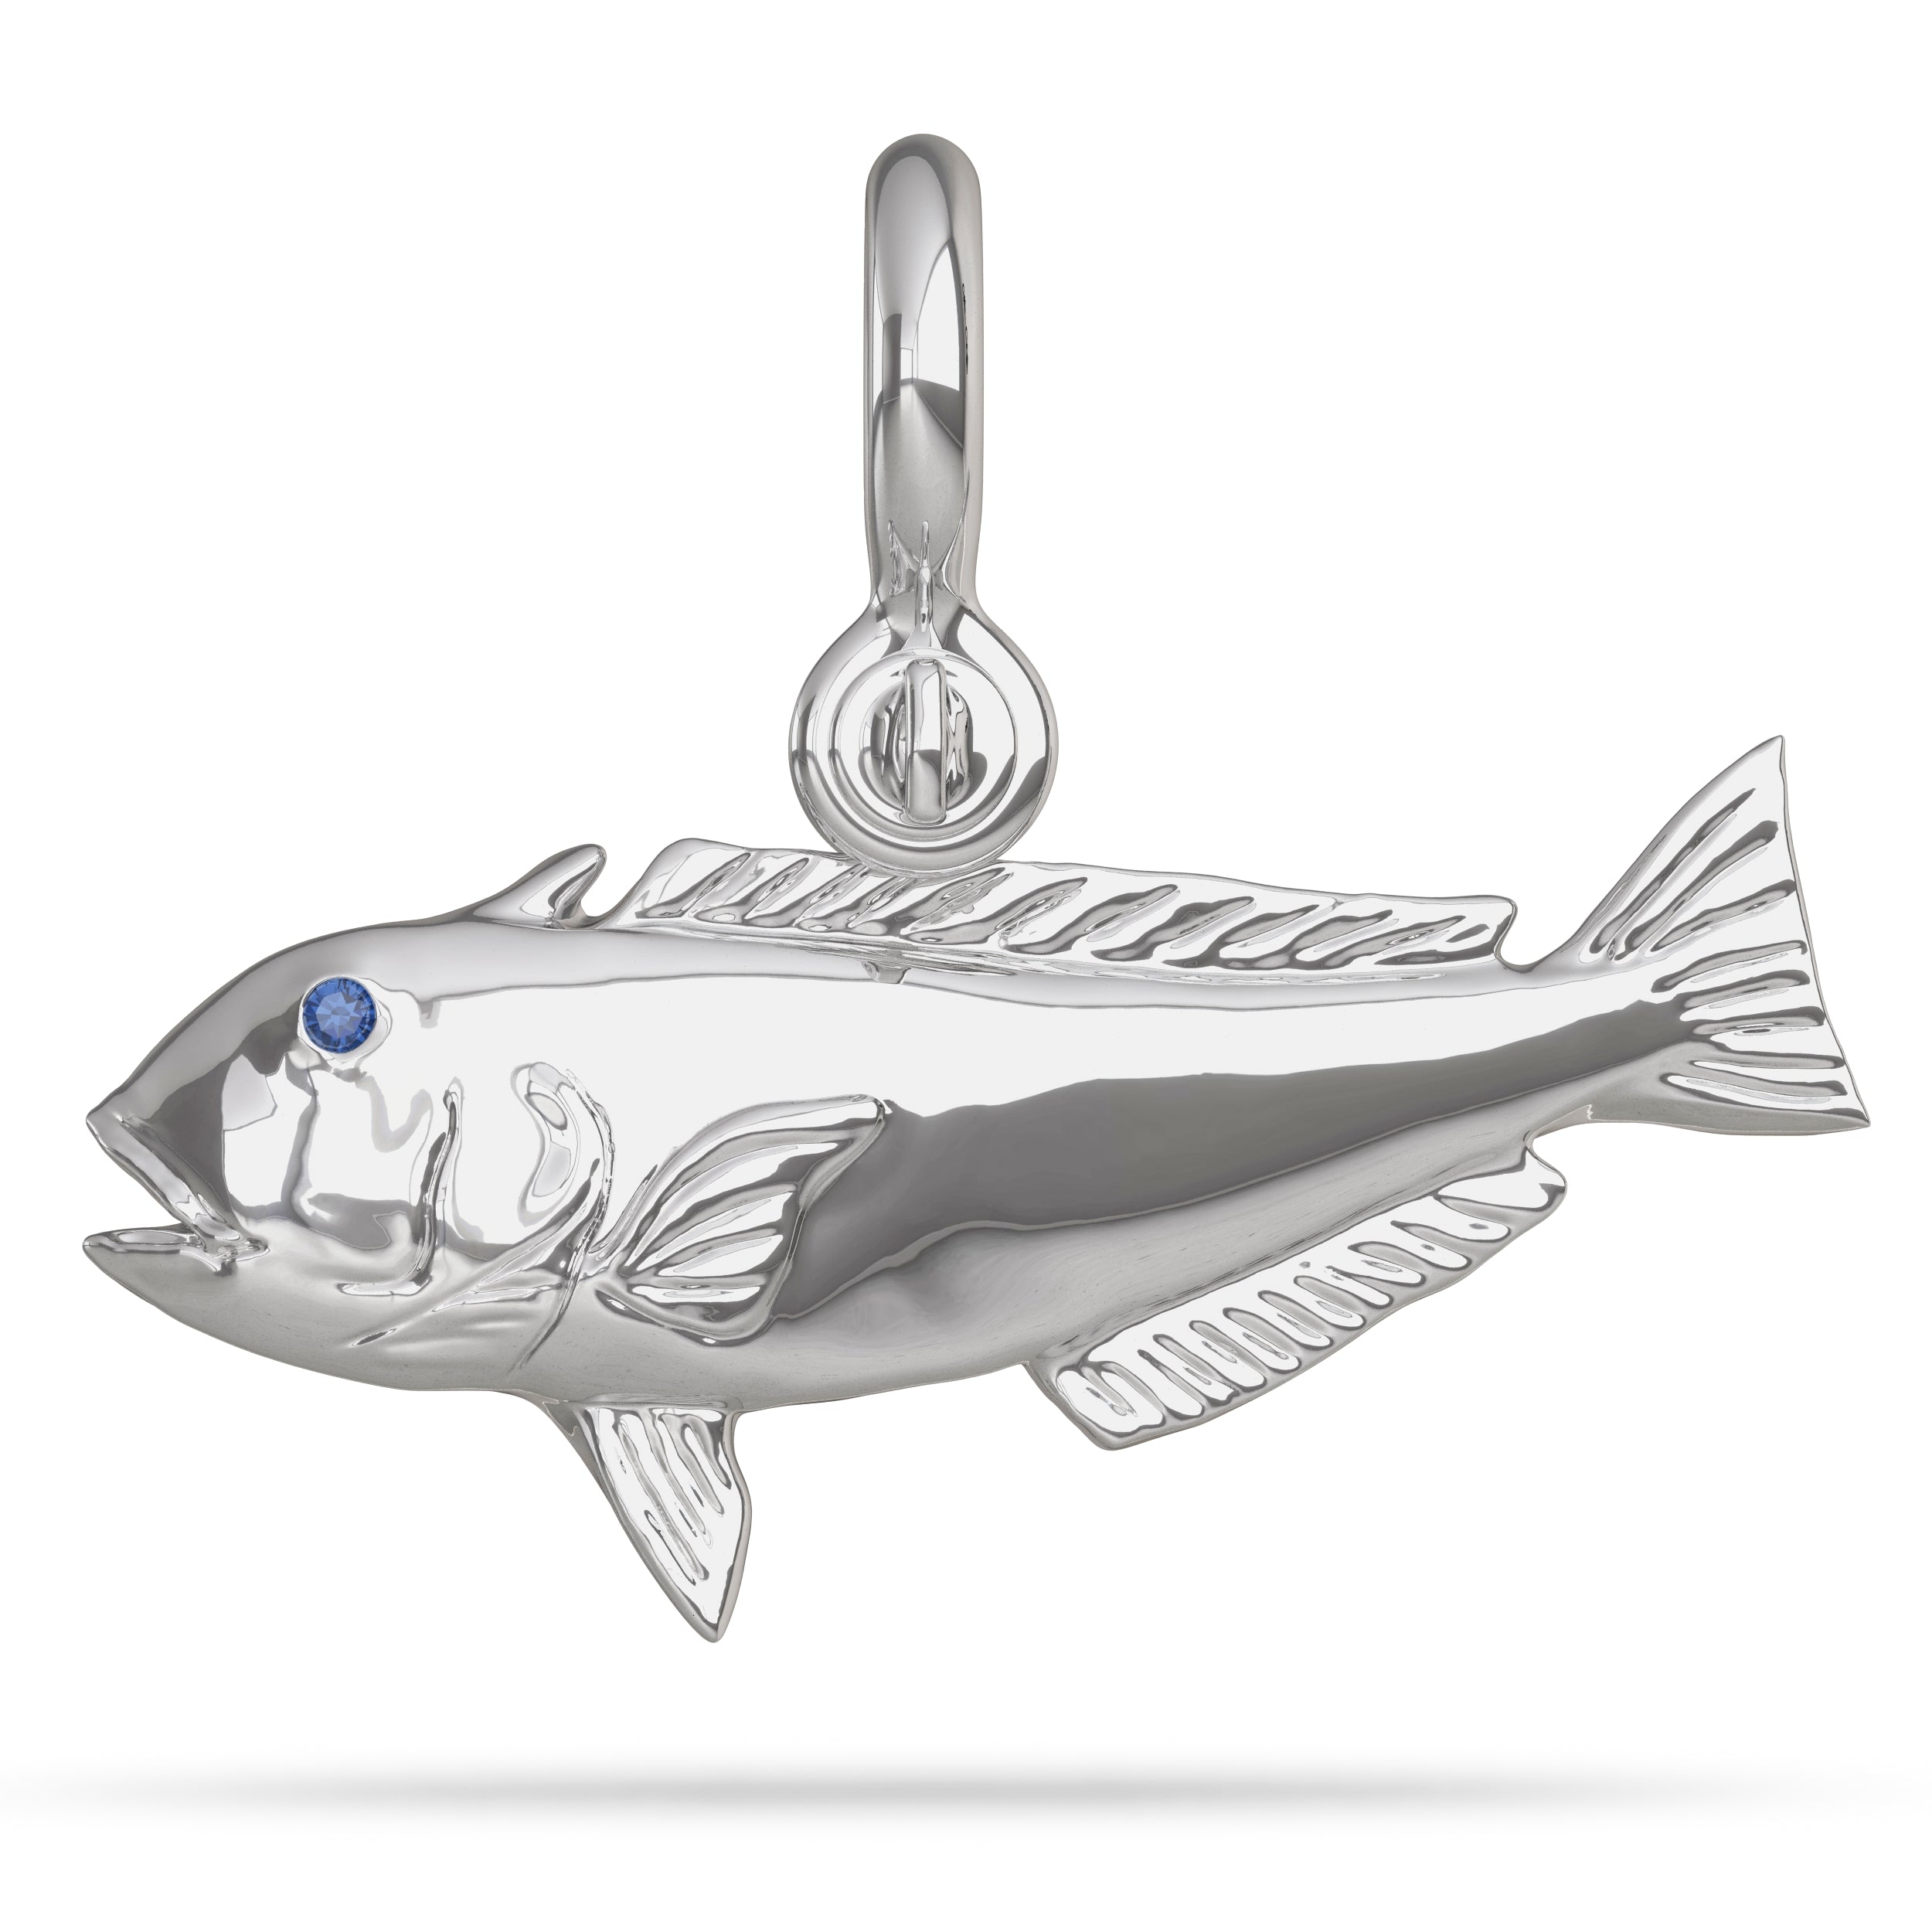 Sterling Silver Great Northern Golden Tilefish Pendant High Polished Mirror Finish With Blue Sapphire Eye with A Mariner Shackle Bail Custom Designed By Nautical Treasure Jewelry In The Florida Keys Deep Drop Fishing